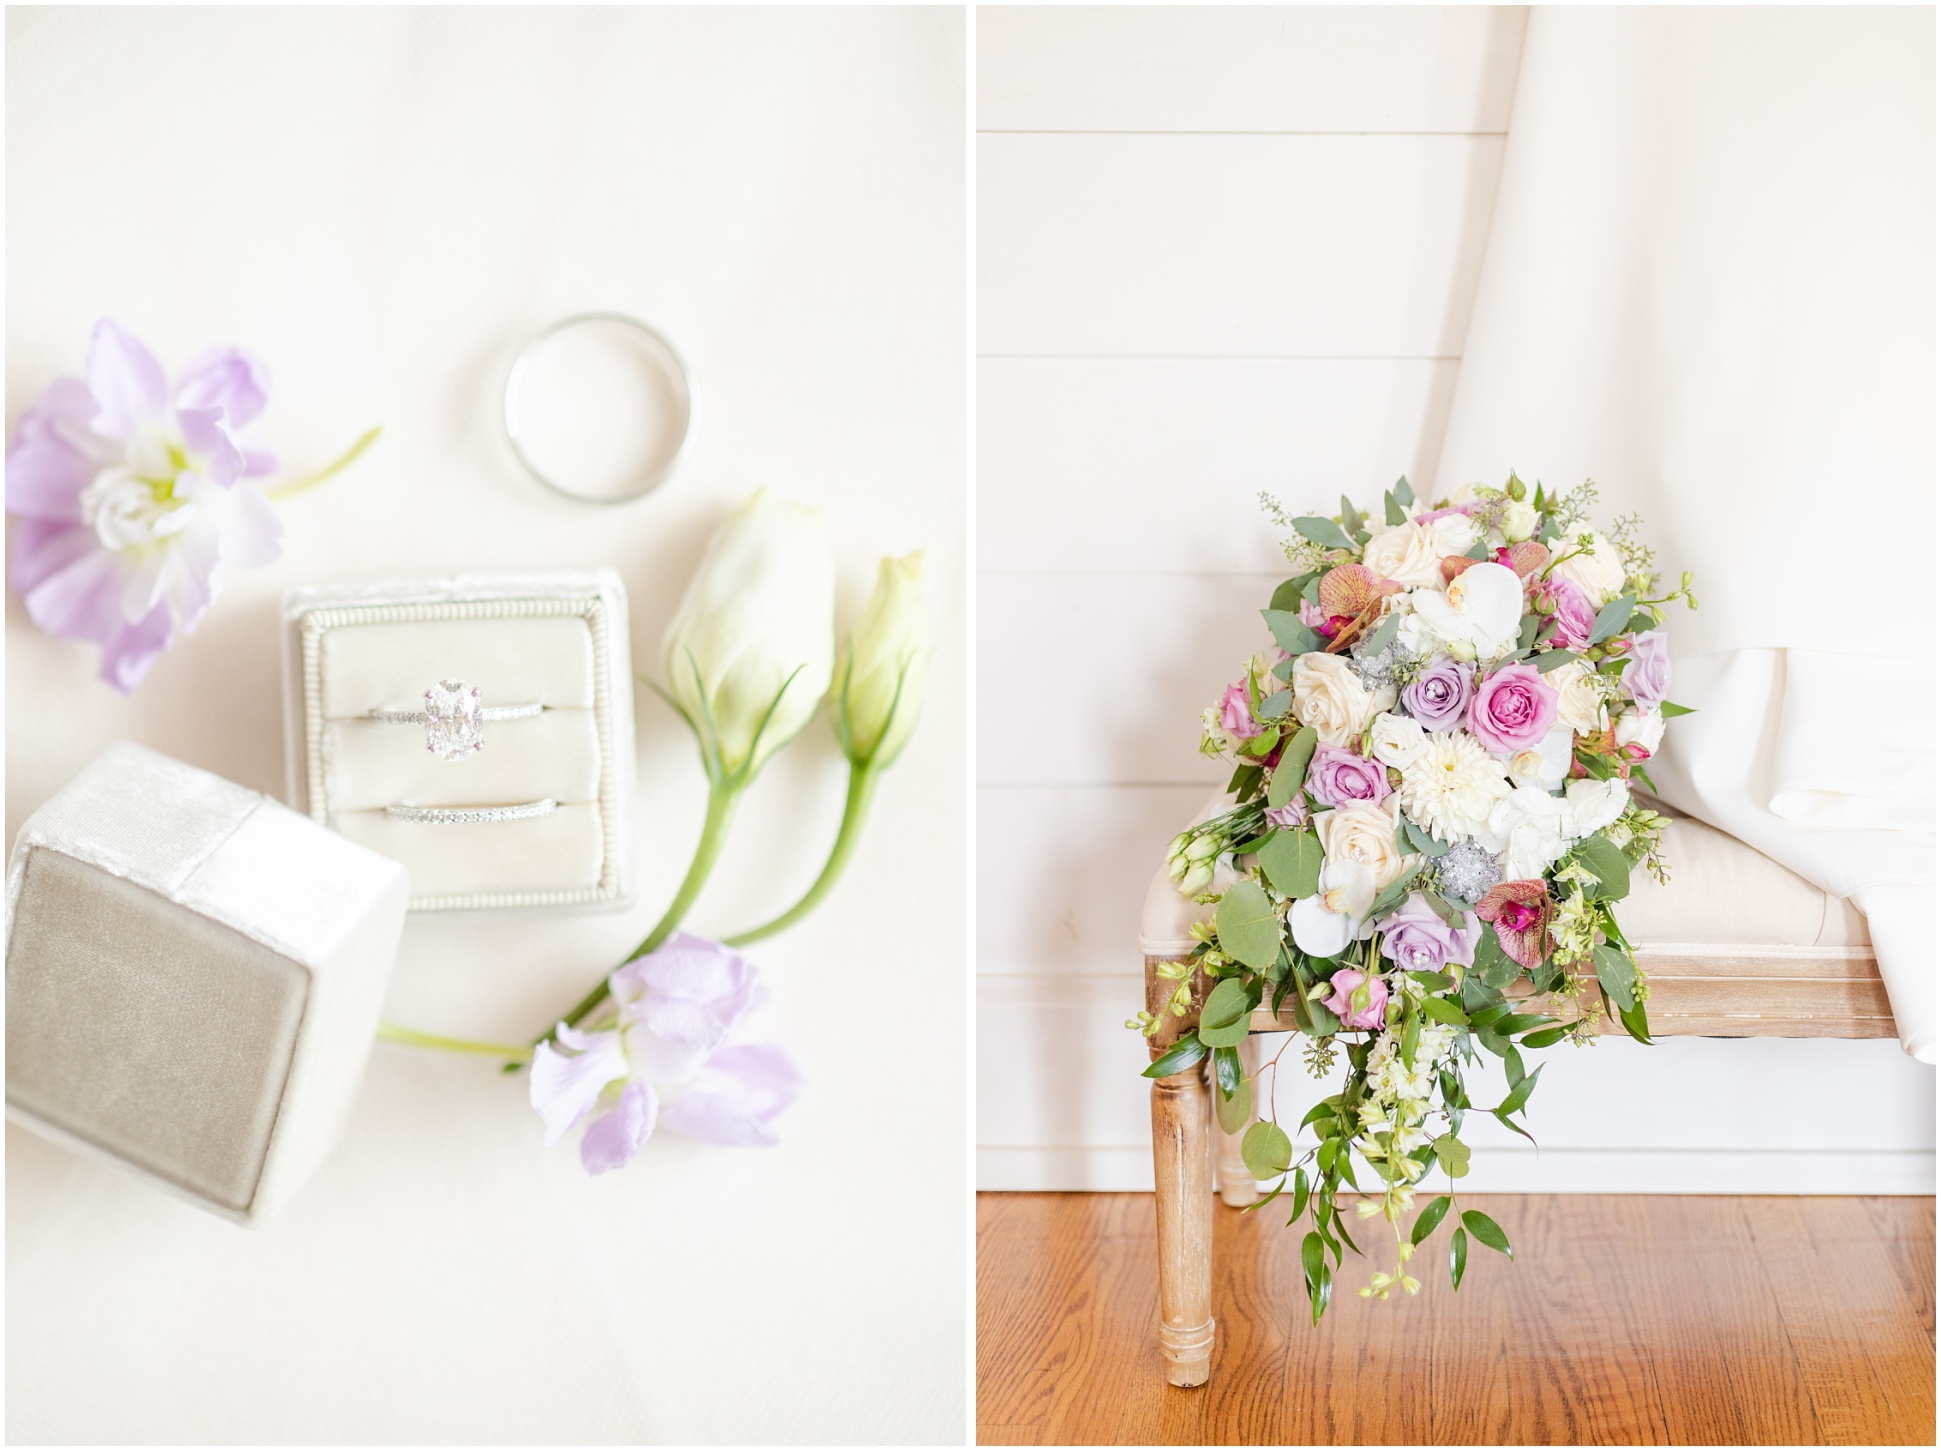 Left: Wedding Rings and Flowers, Right: Wedding Bouquet on bench